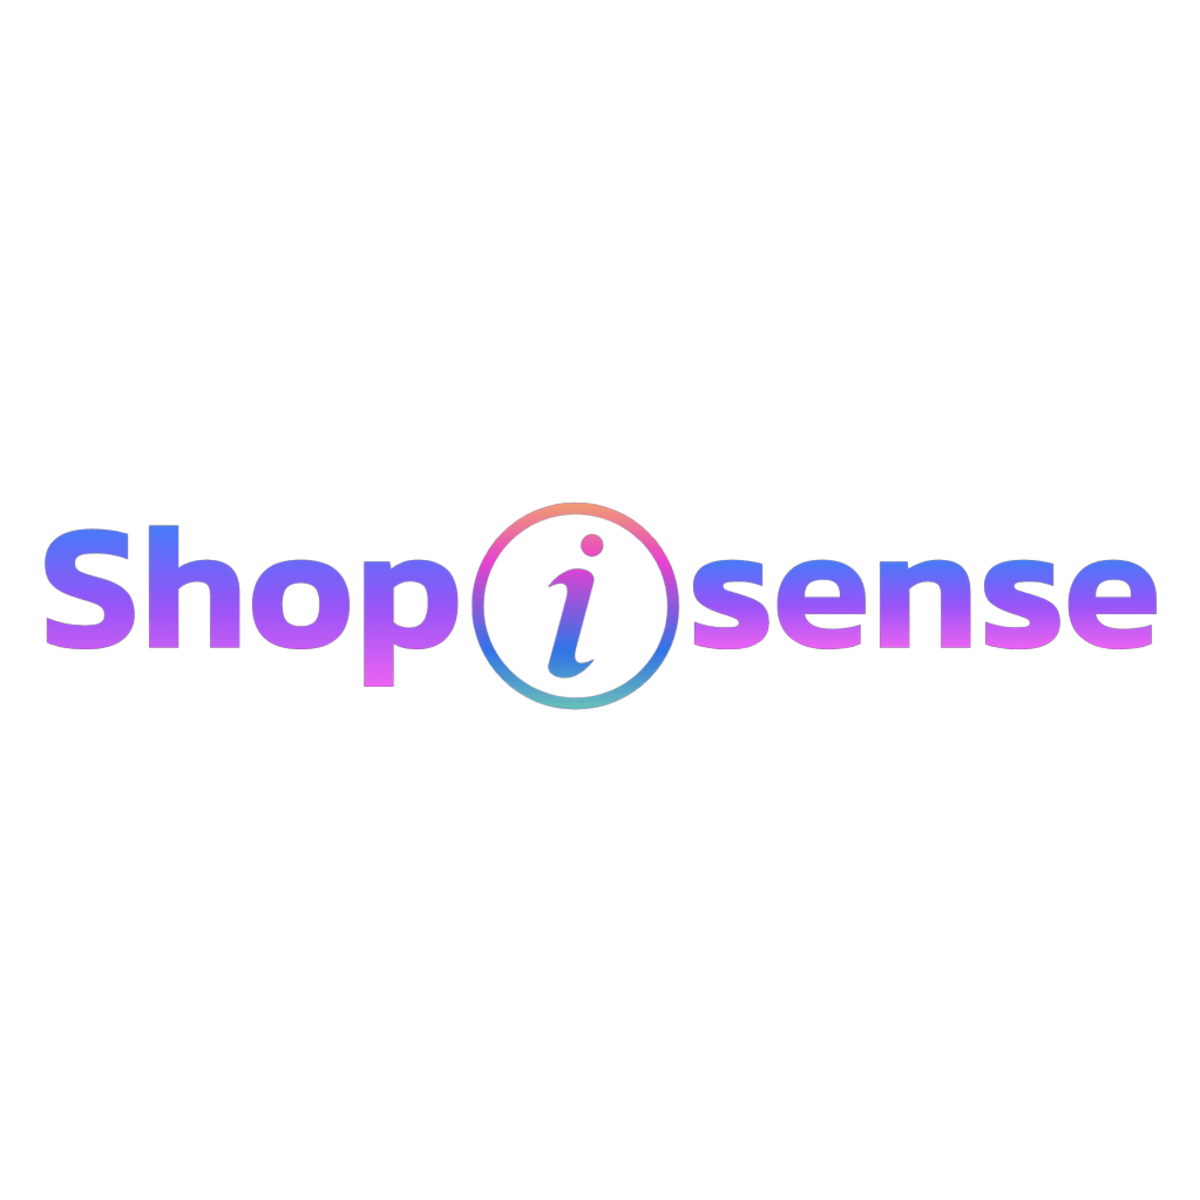 Hire Shopify Experts to integrate shopisense app into a Shopify store